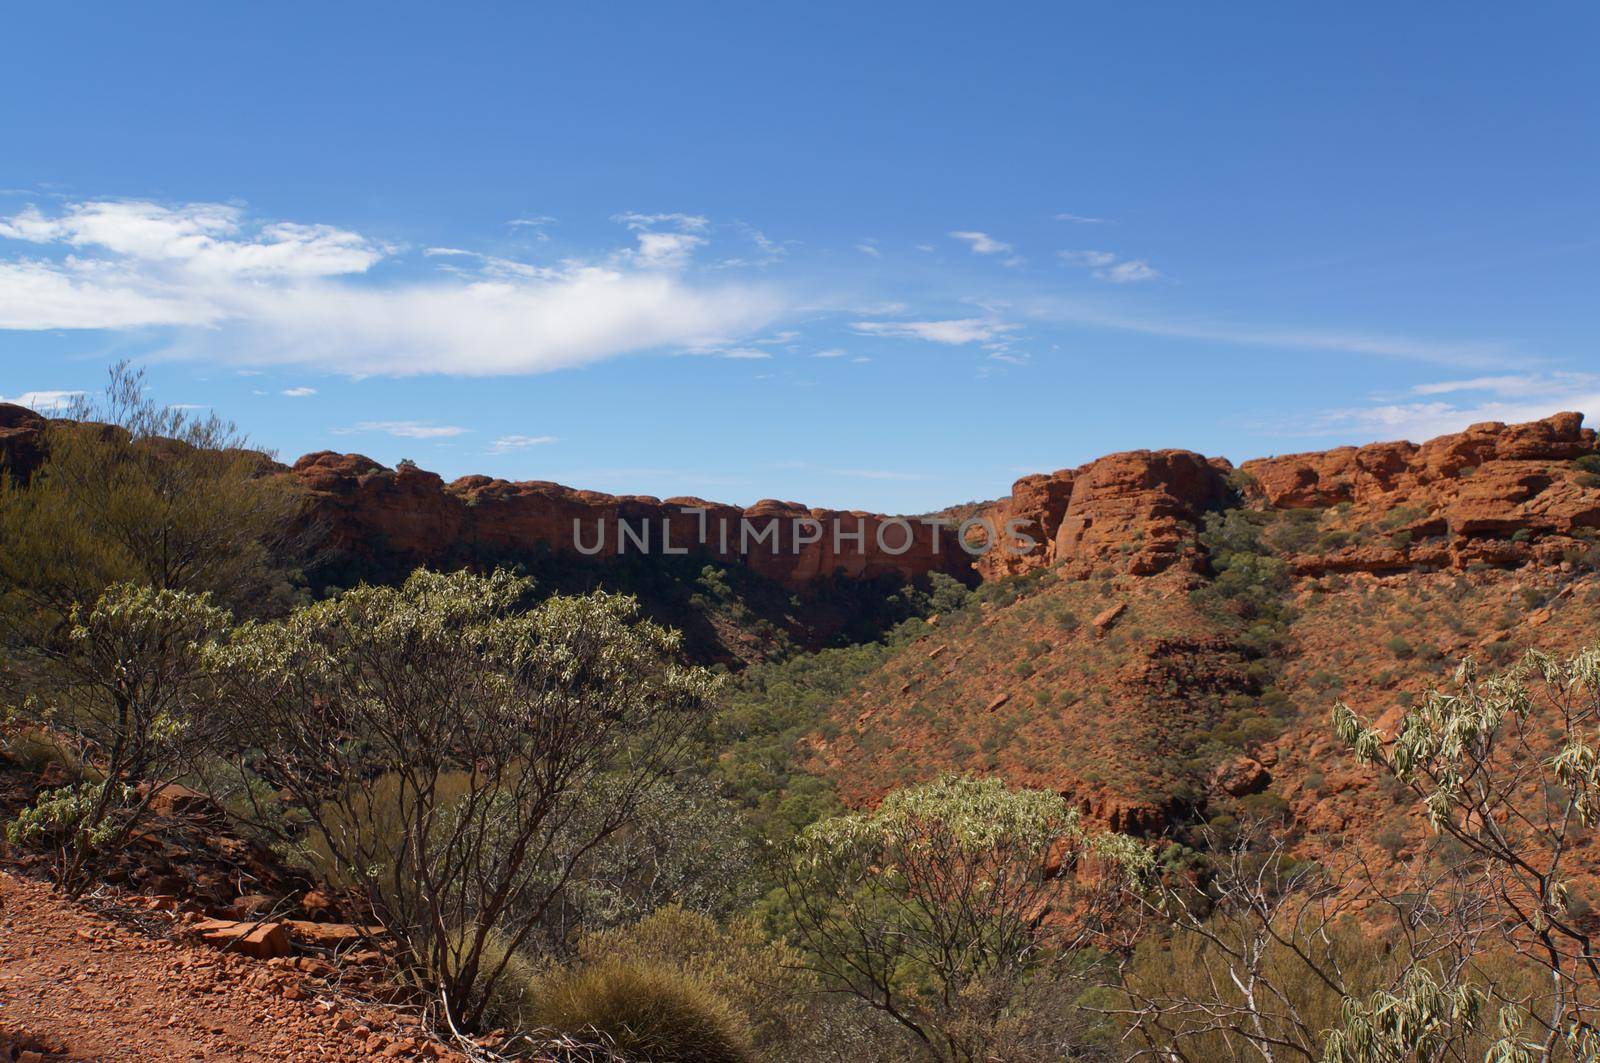 view into a Canyon in australia, Watarrka National Park, Northern Territory, Australia by bettercallcurry